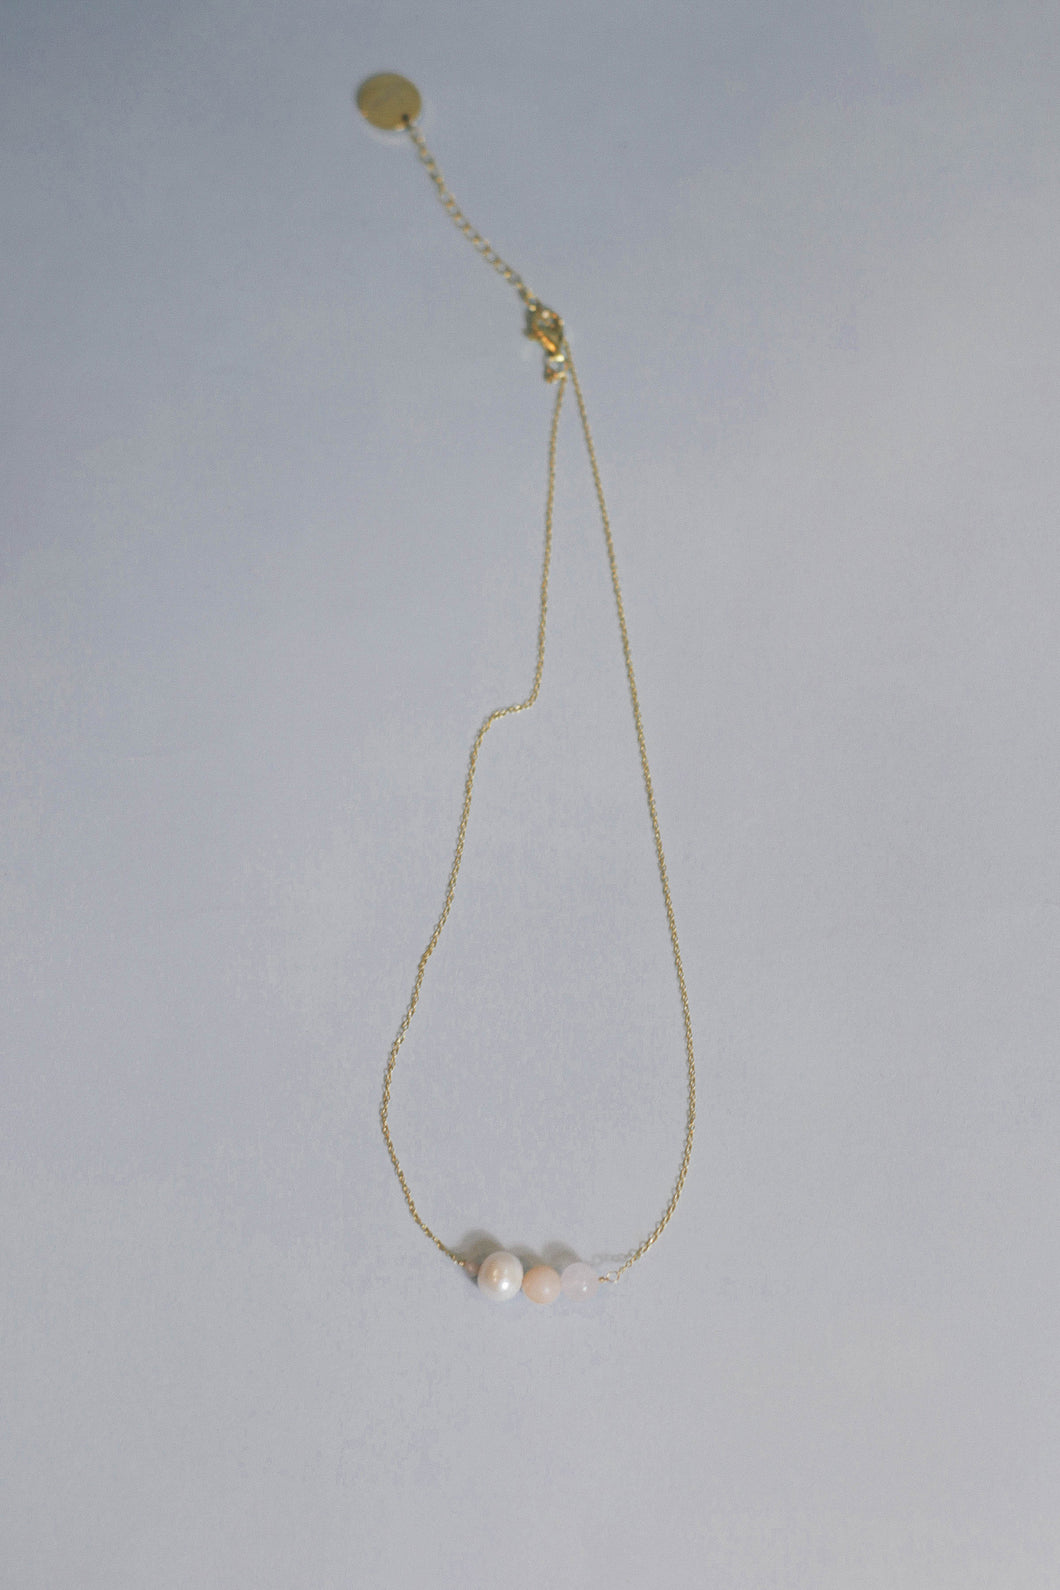 Morgan necklace from morganite and pearl